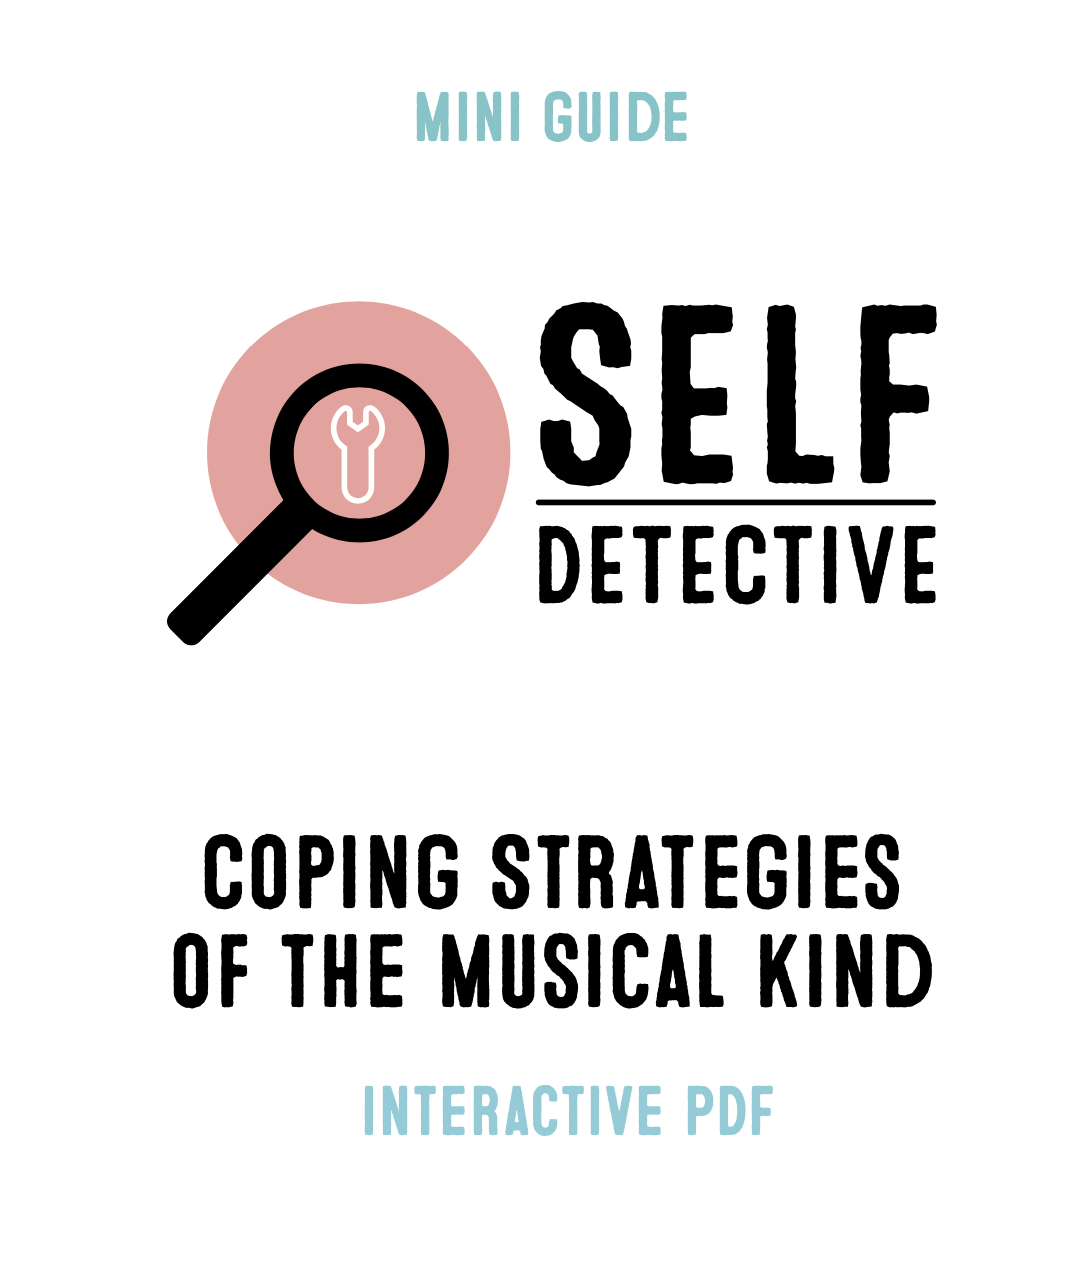 Coping Strategies of the Musical Kind (Interactive PDF version)